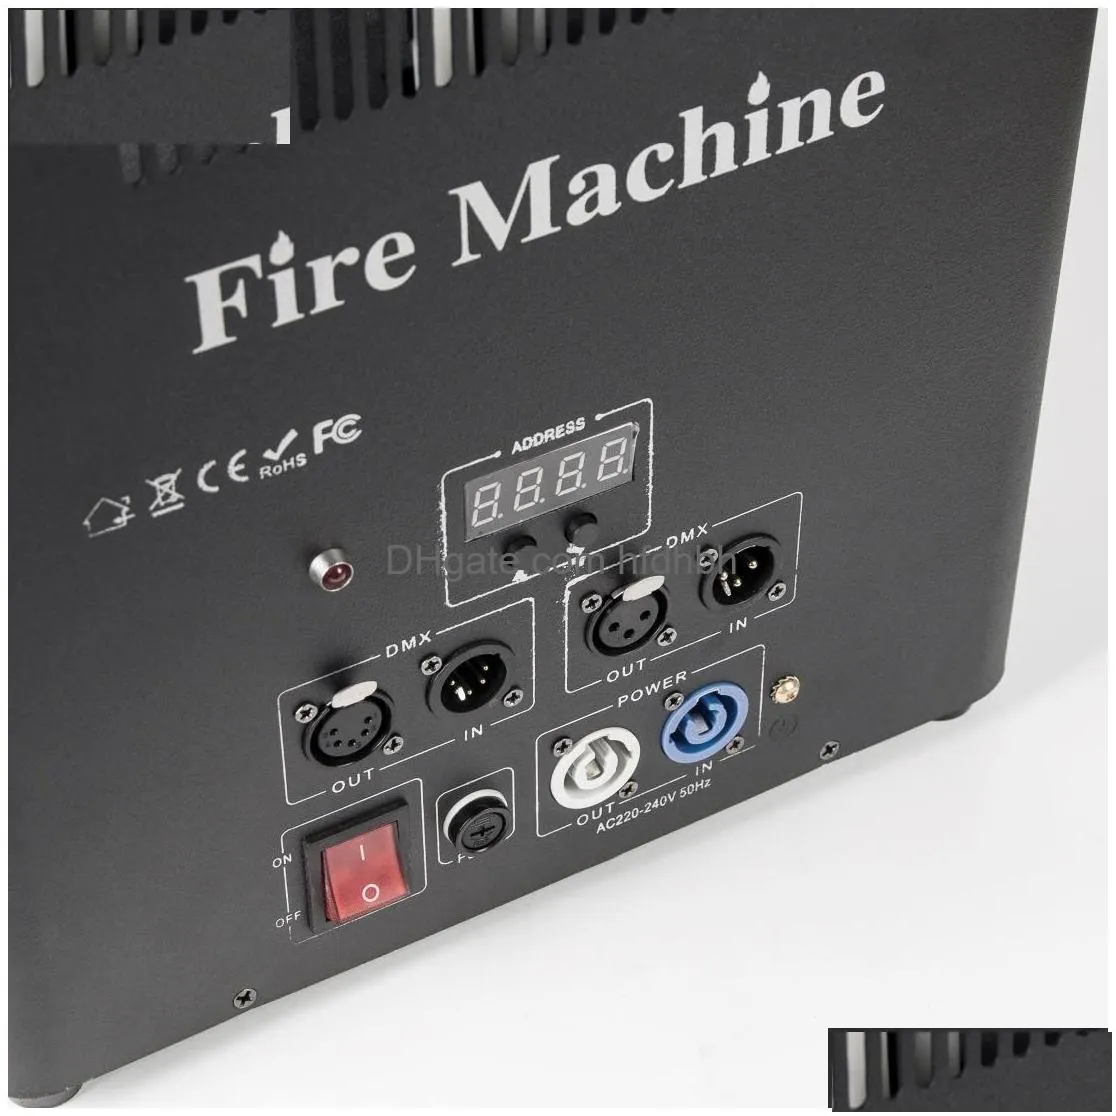 sfx triple way flame projector stage lighting dmx fire machine outdoor dj 5 channels high quality valve lcd display